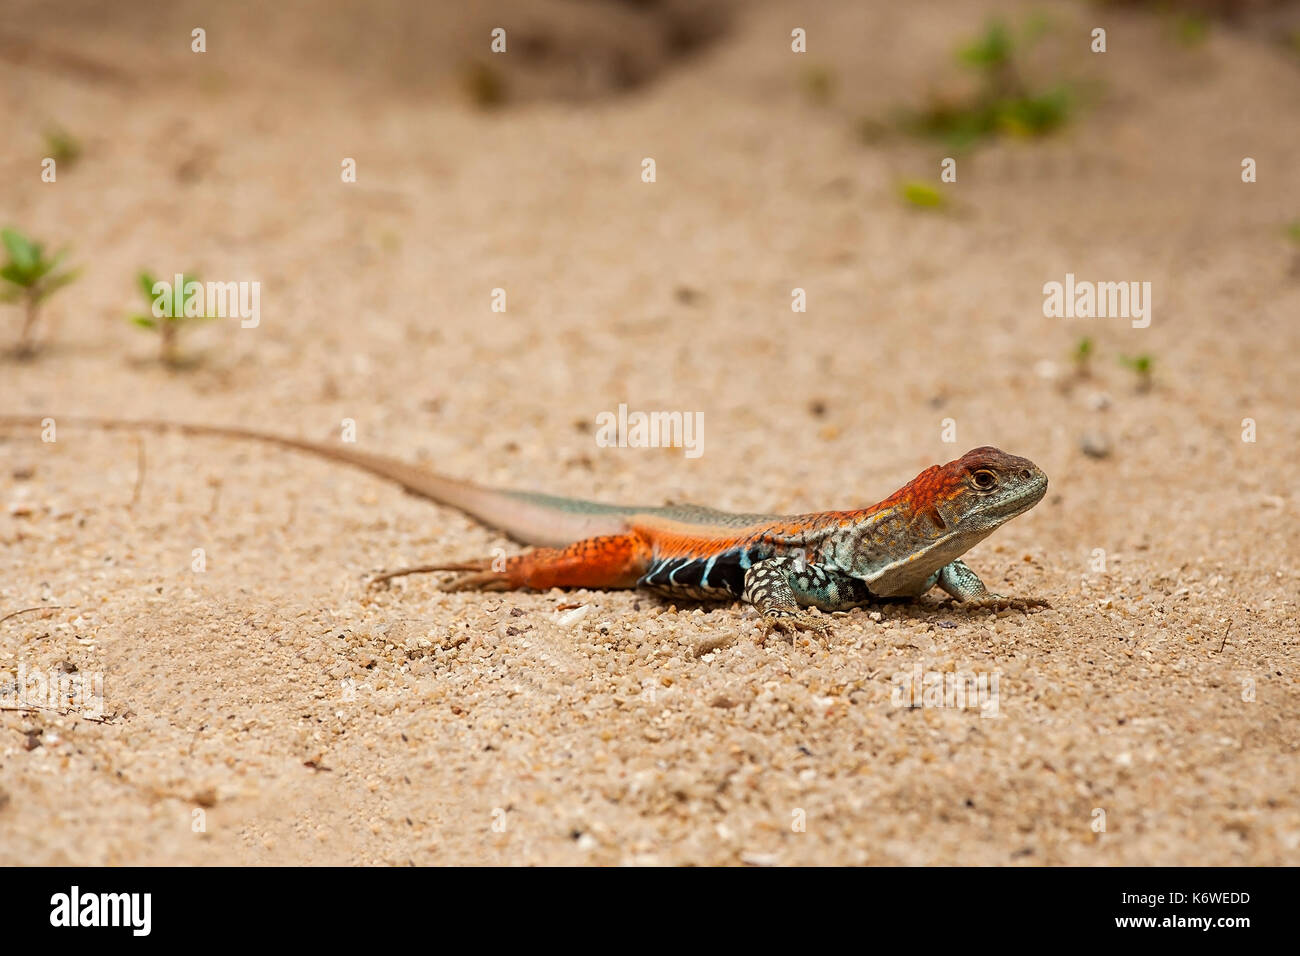 Common butterfly lizard (Leiolepis belliana), in sand, Hong Ong Island, Vietnam Stock Photo